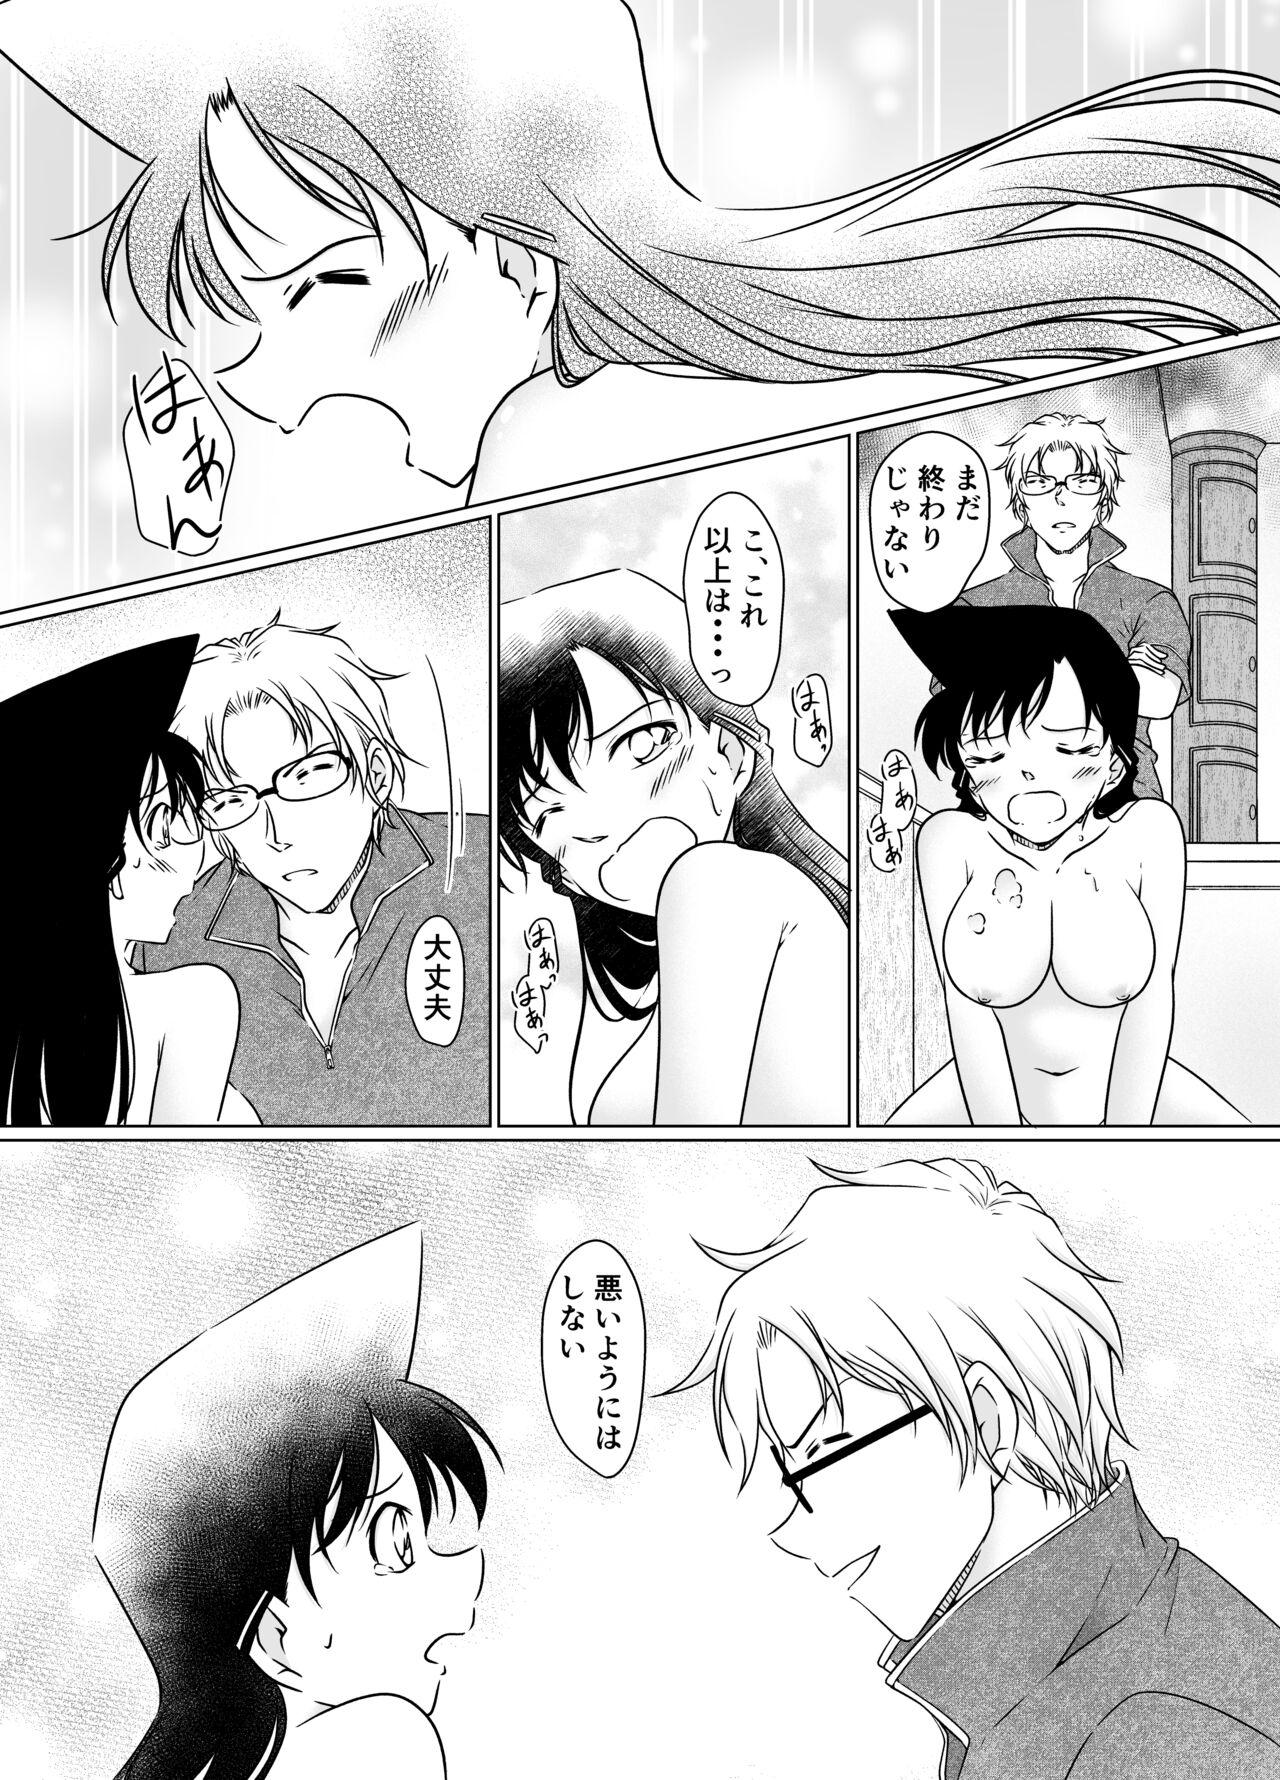 【Detective Conan】Something is wrong in the afternoon 21